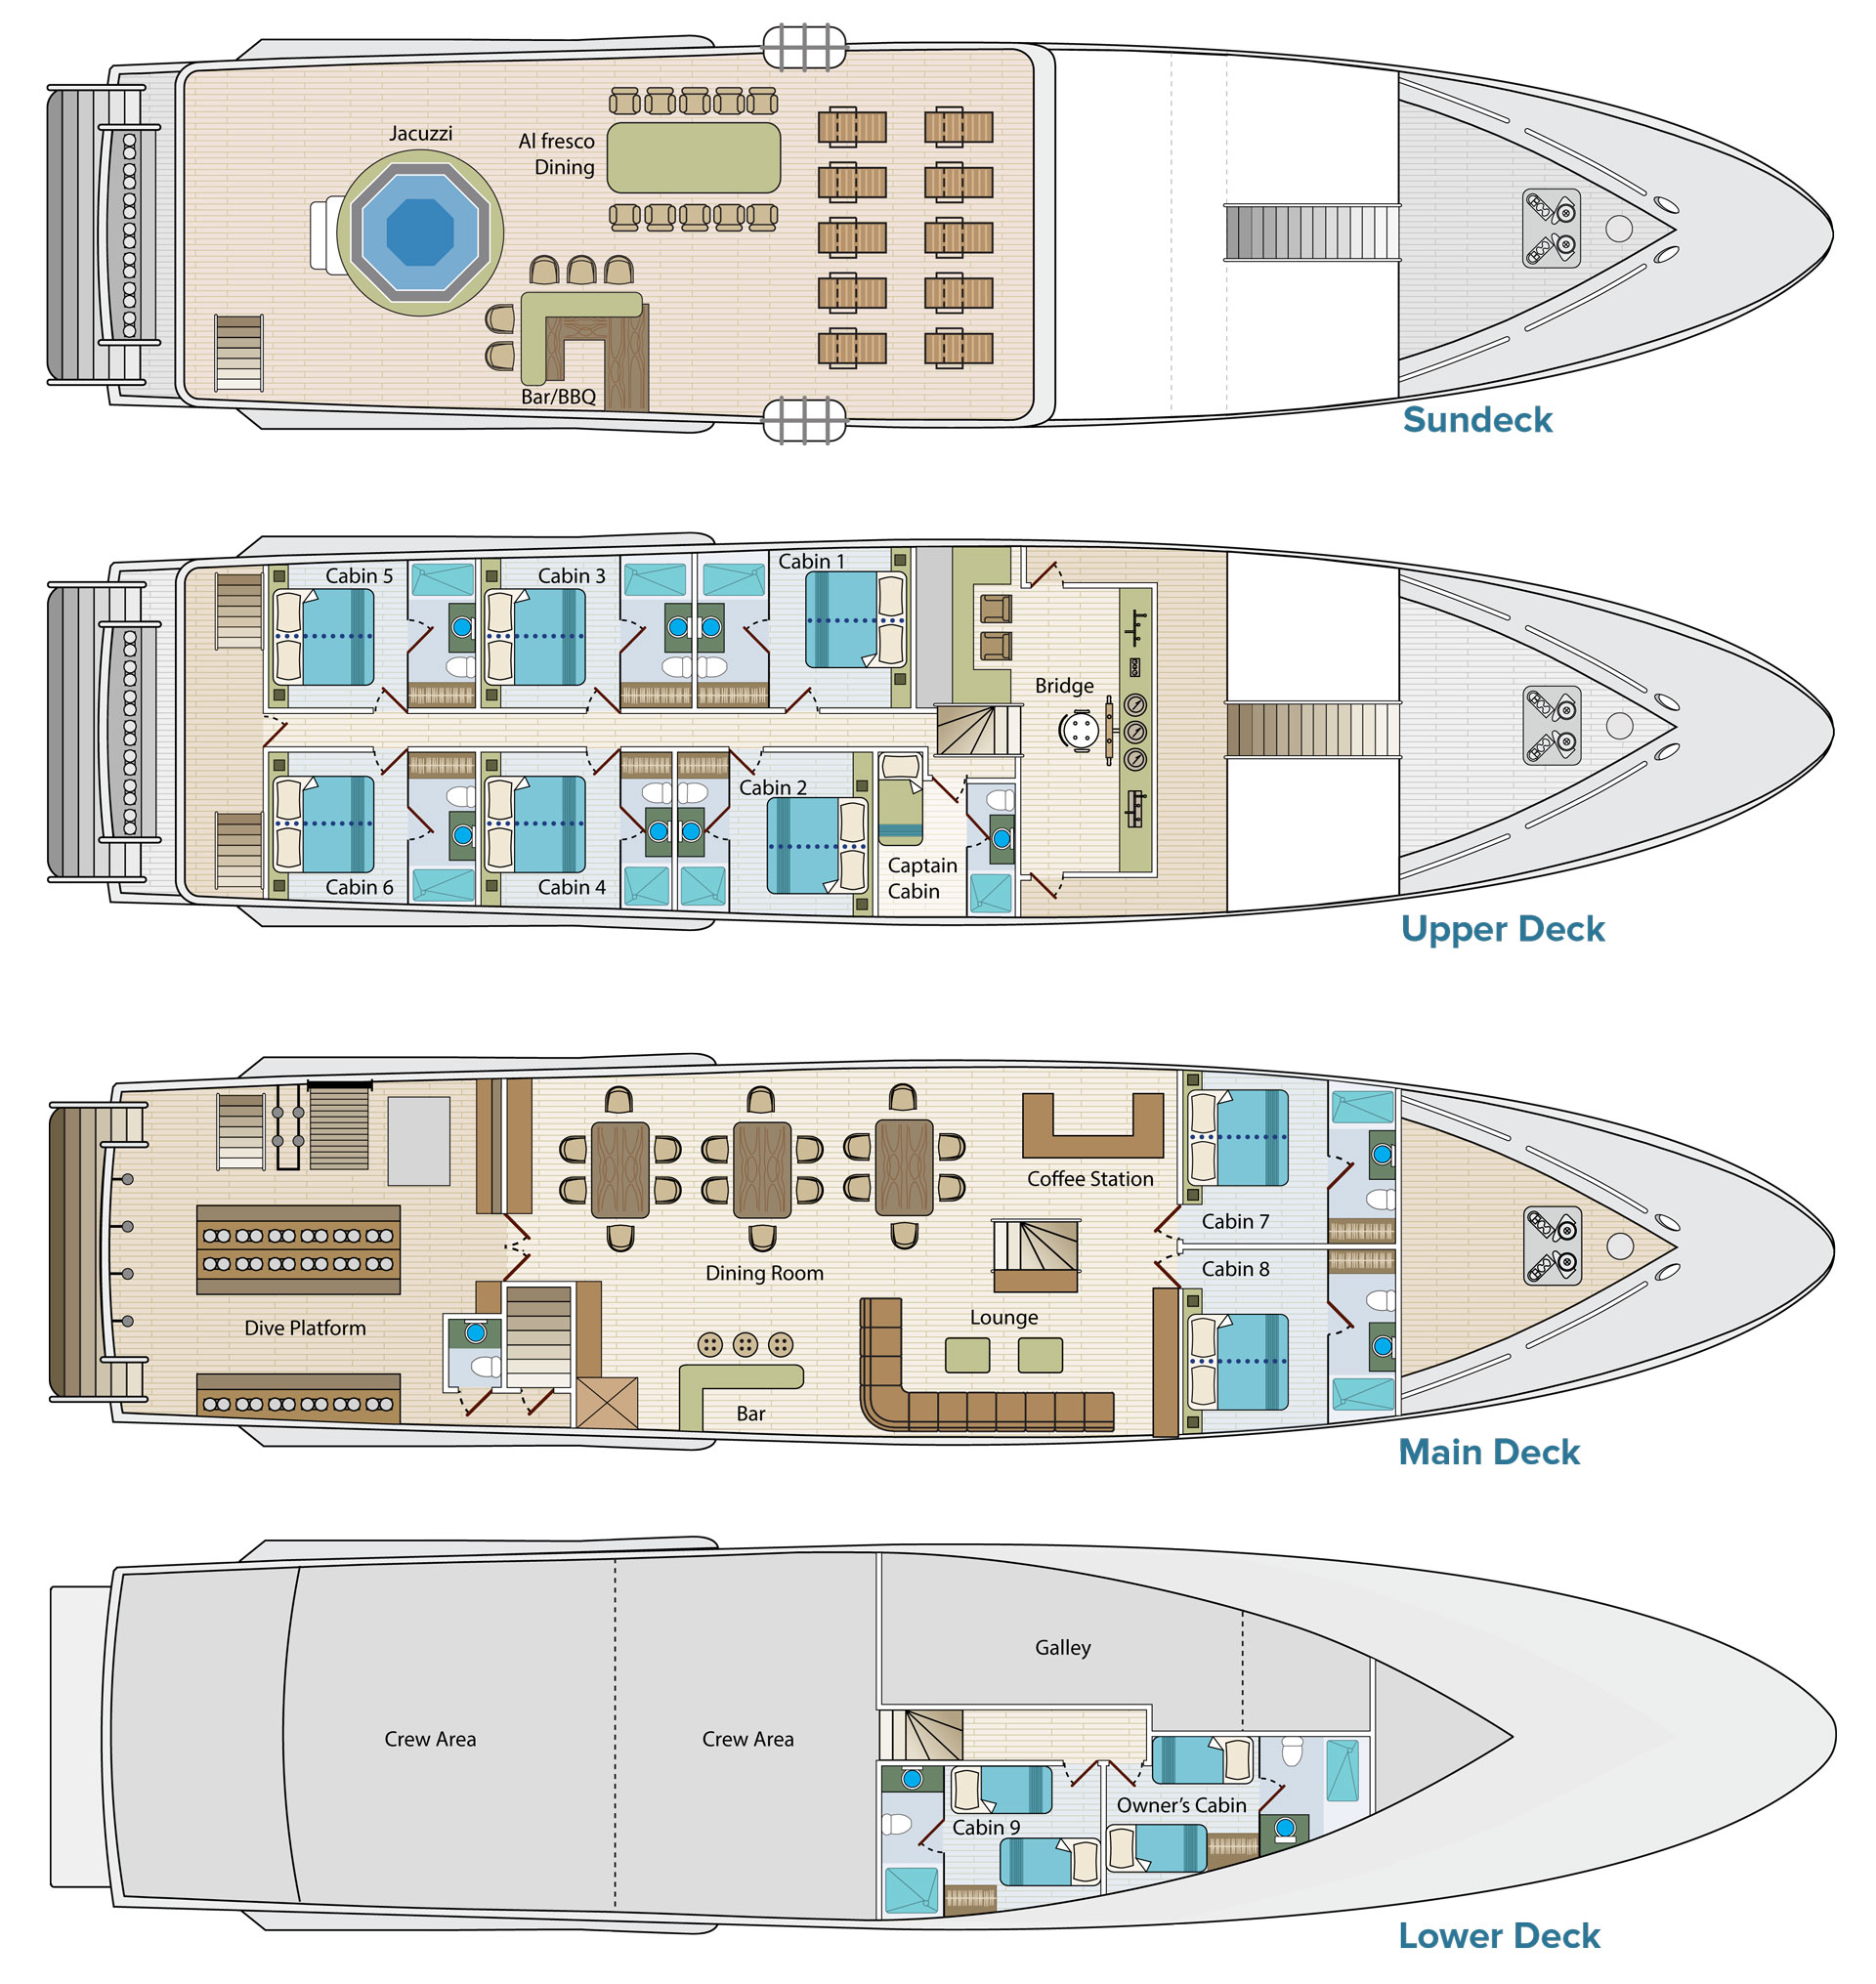 Deck plan of Calipso yacht in Galapagos showing 4 decks, 10 cabins, dive platform, jacuzzi, bridge, lounge, dining room & more.